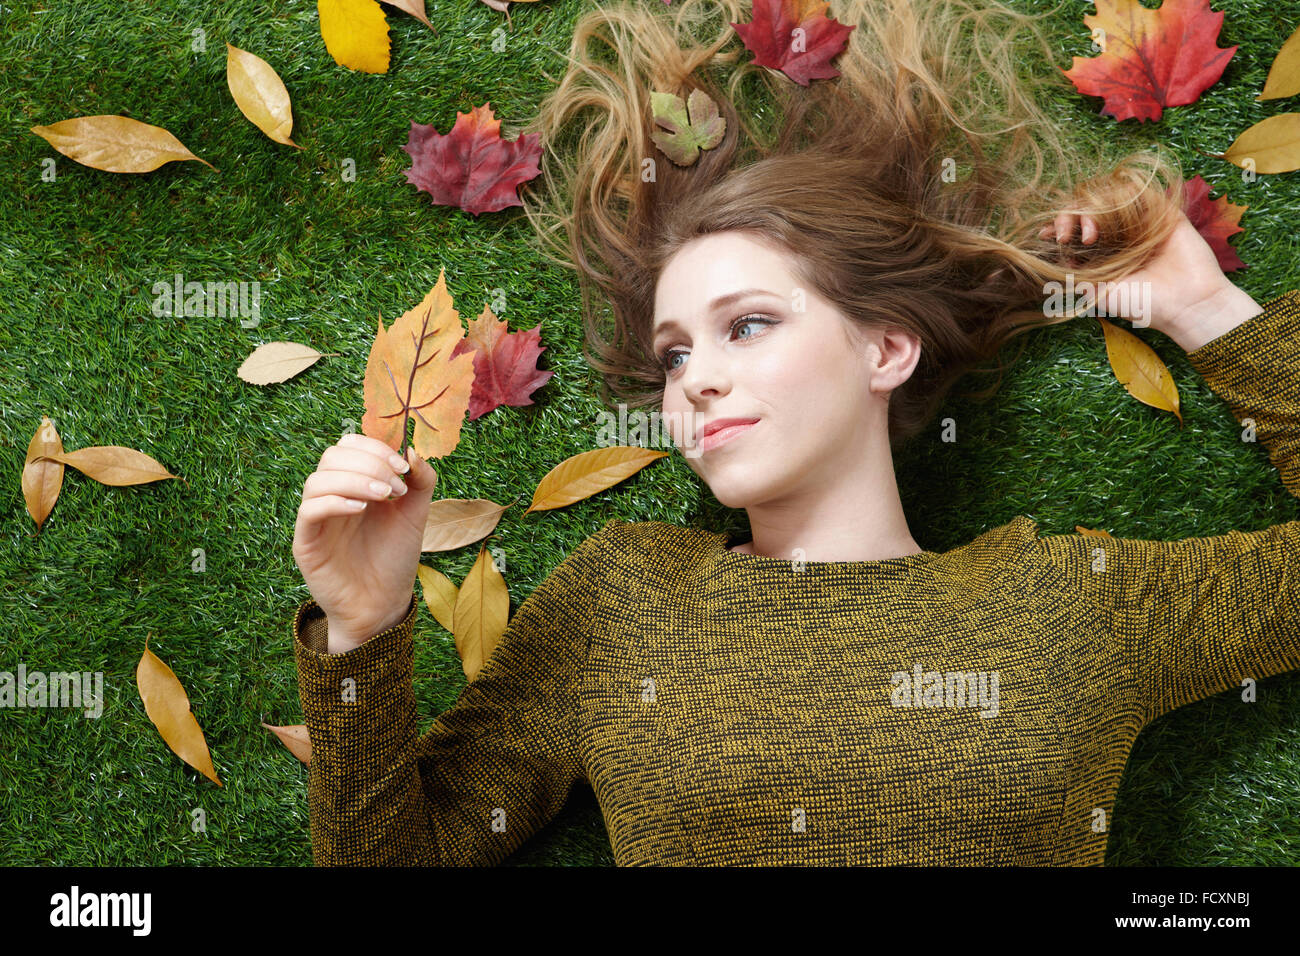 Portrait of young woman with long hair lying down on grass with fallen leaves Stock Photo